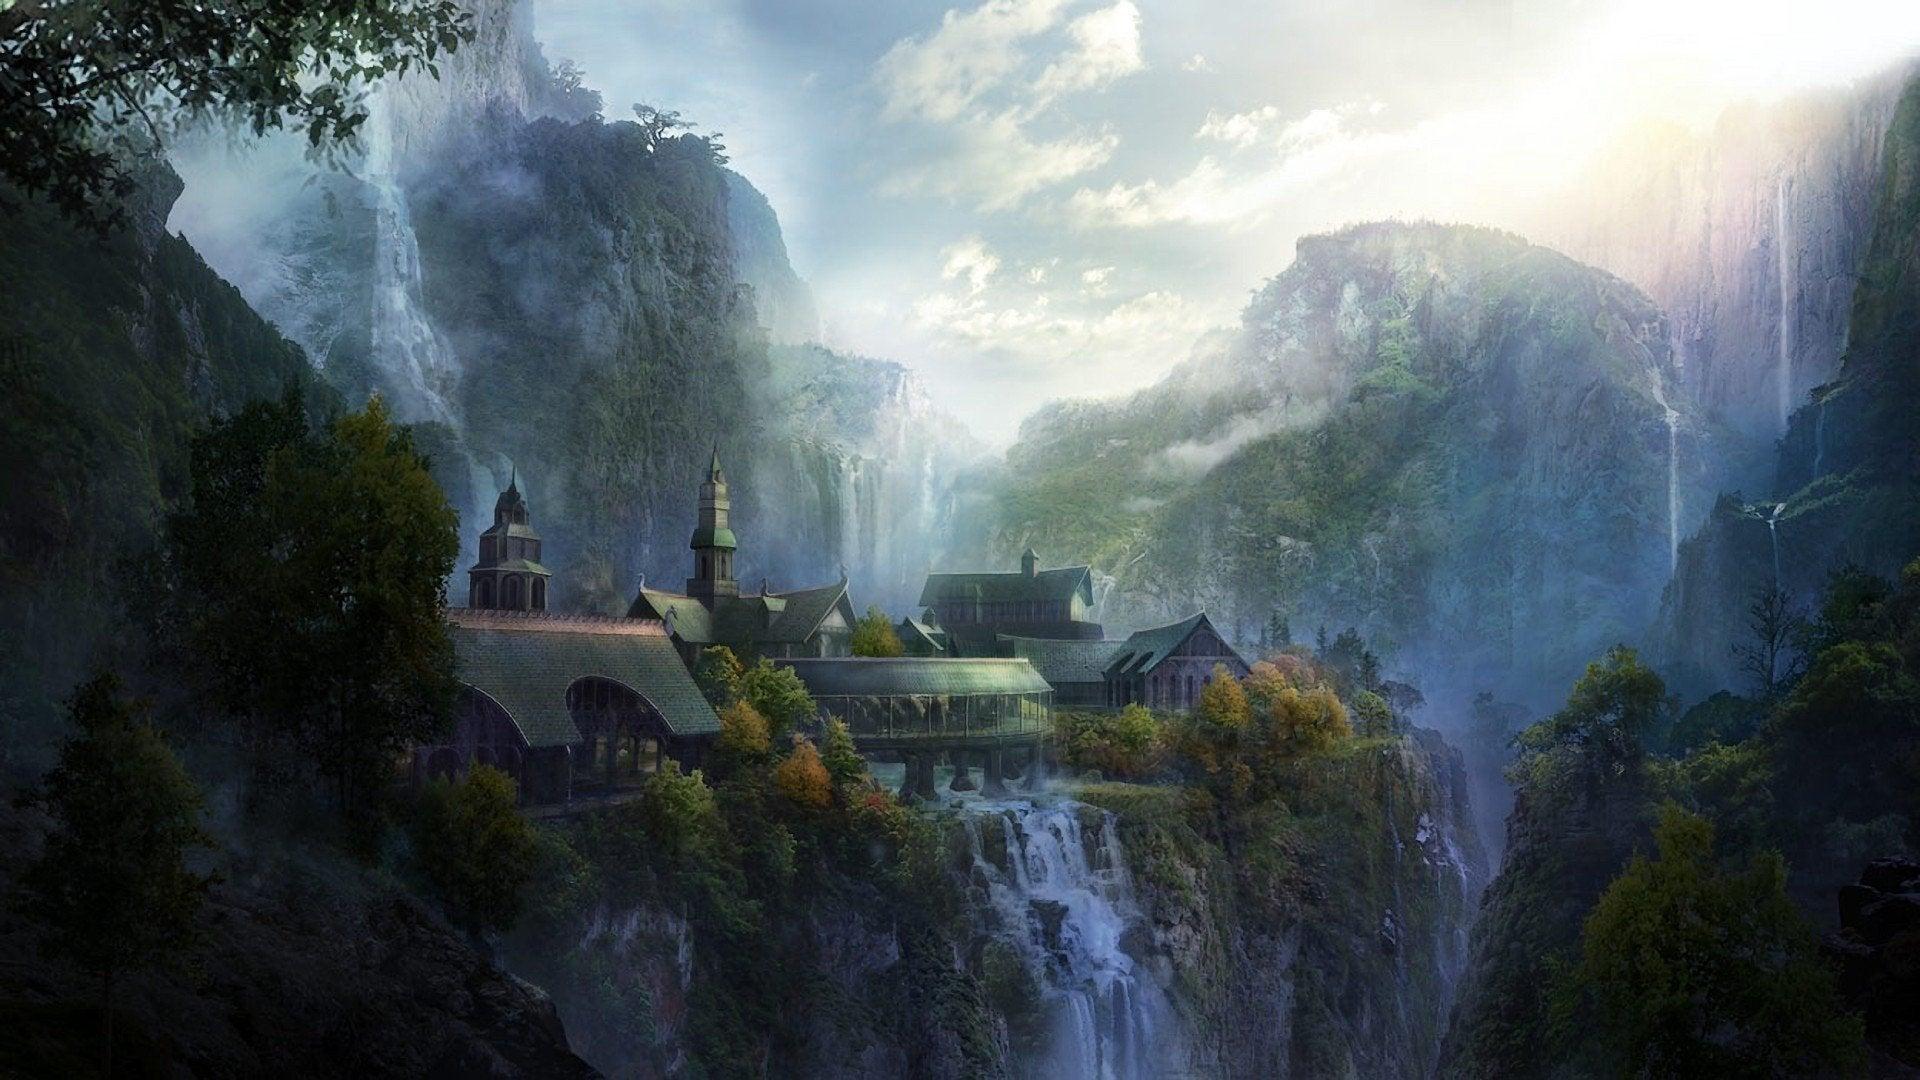 Rivendell Lord of the Rings [1920x1080]